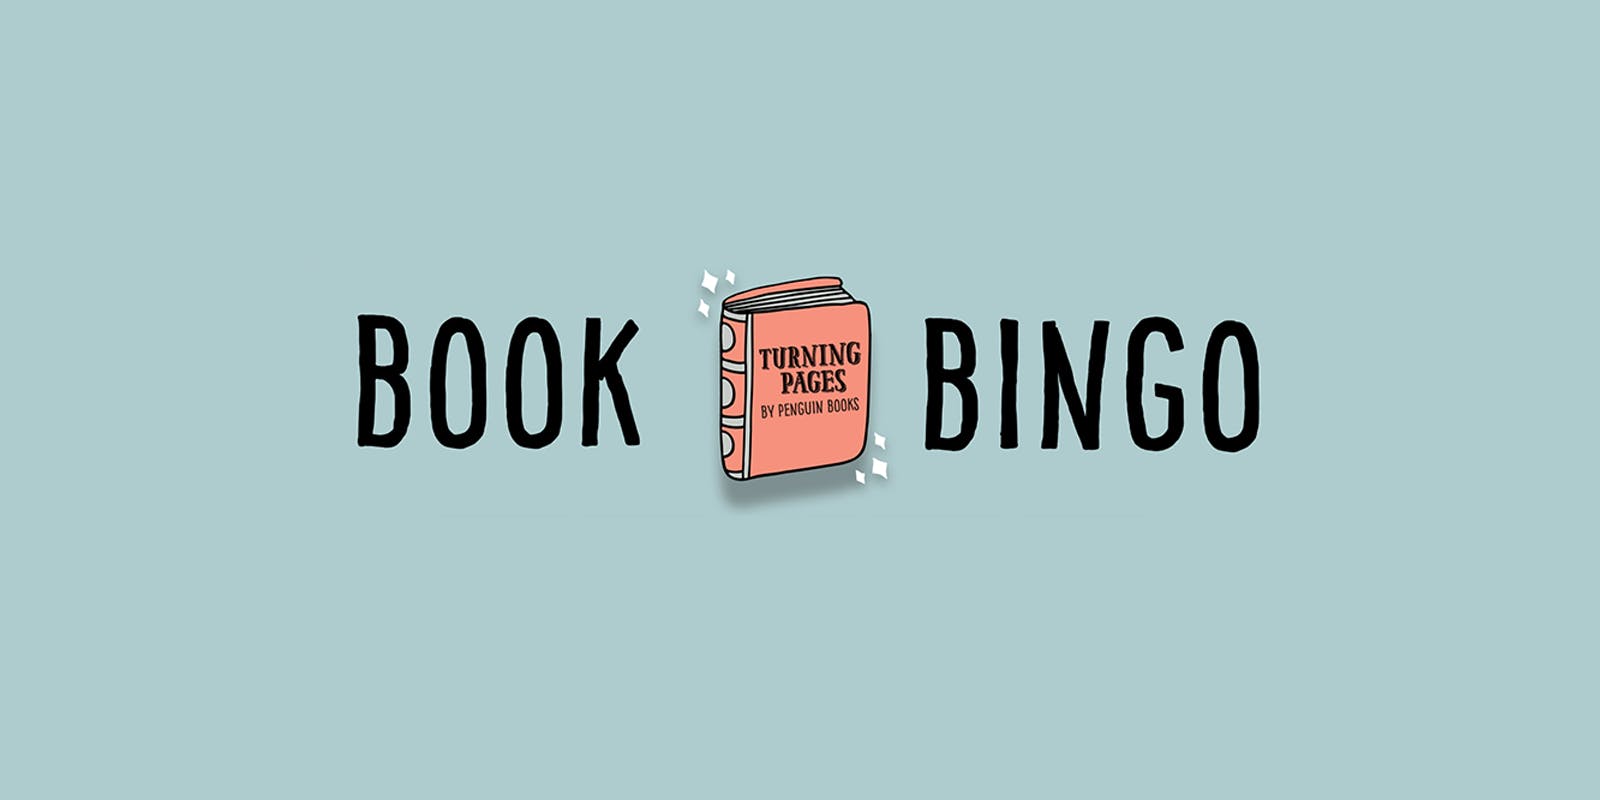 Turning Pages book bingo! 